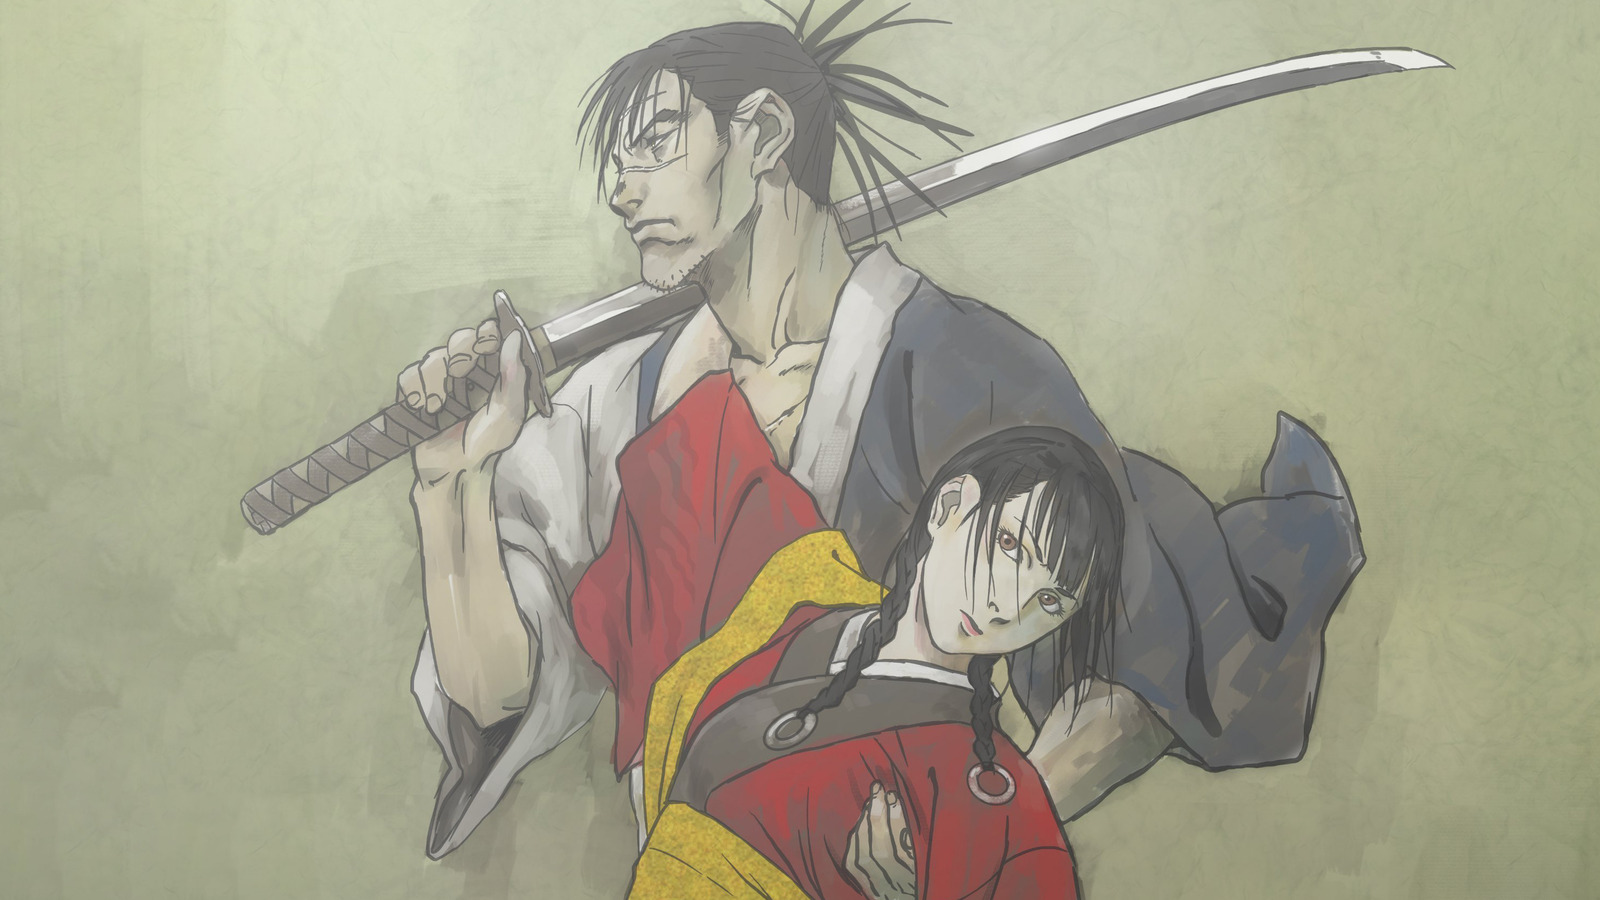 Blade Of The Immortal Is The Best Samurai Comic For Shogun And X-Men Fans